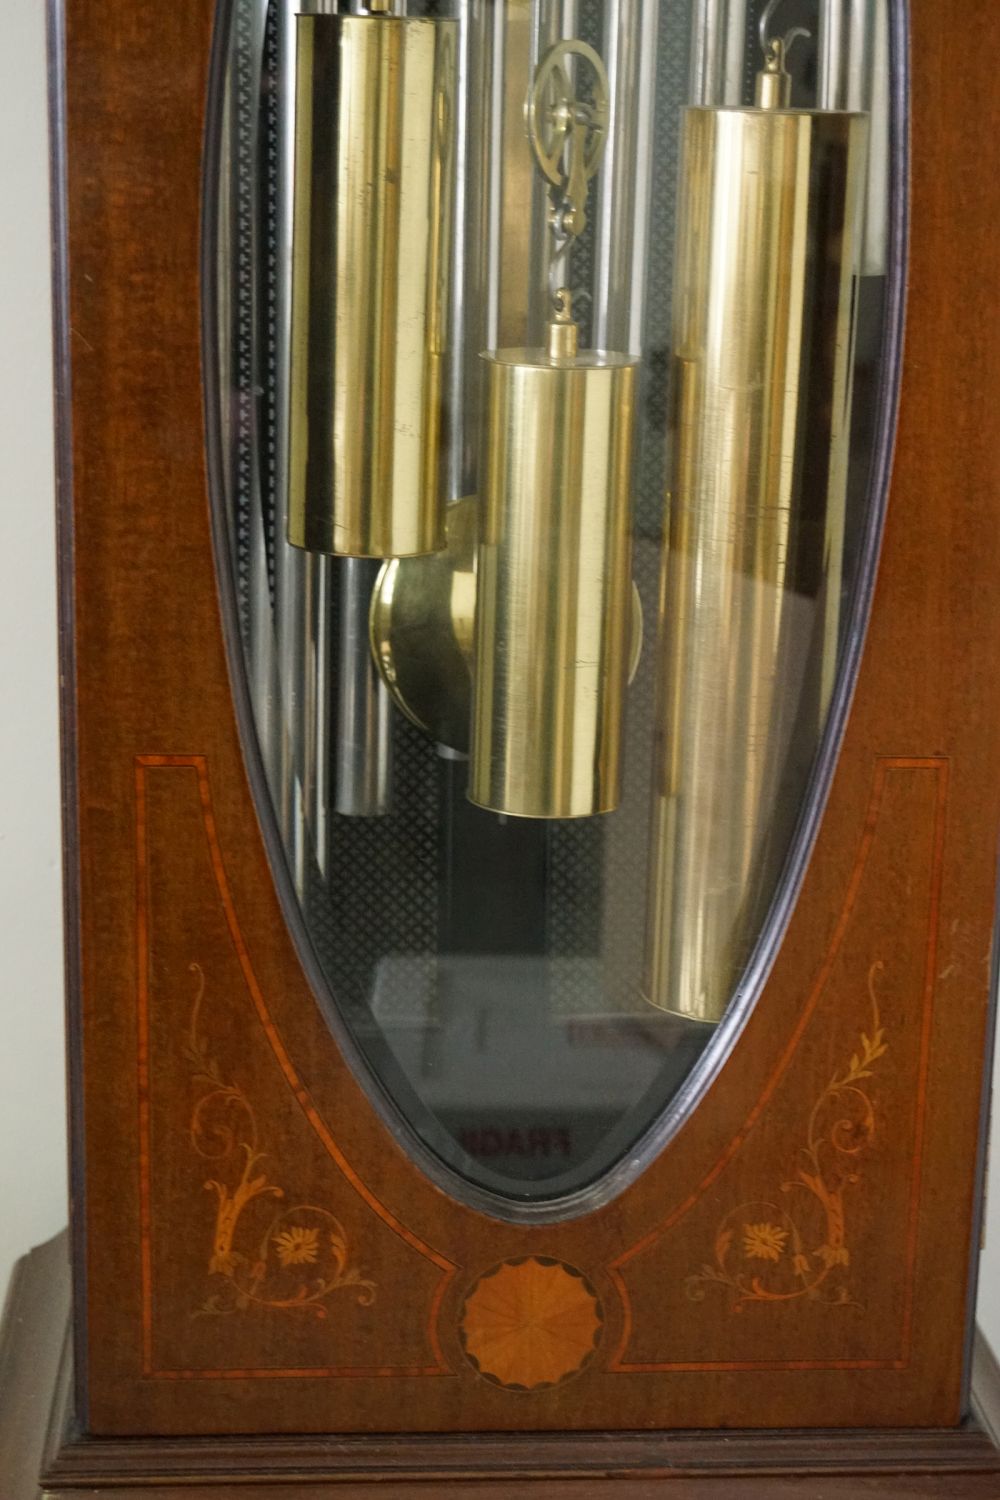 EDWARDIAN MARQUETRY LONG CASE CLOCK - Image 3 of 5